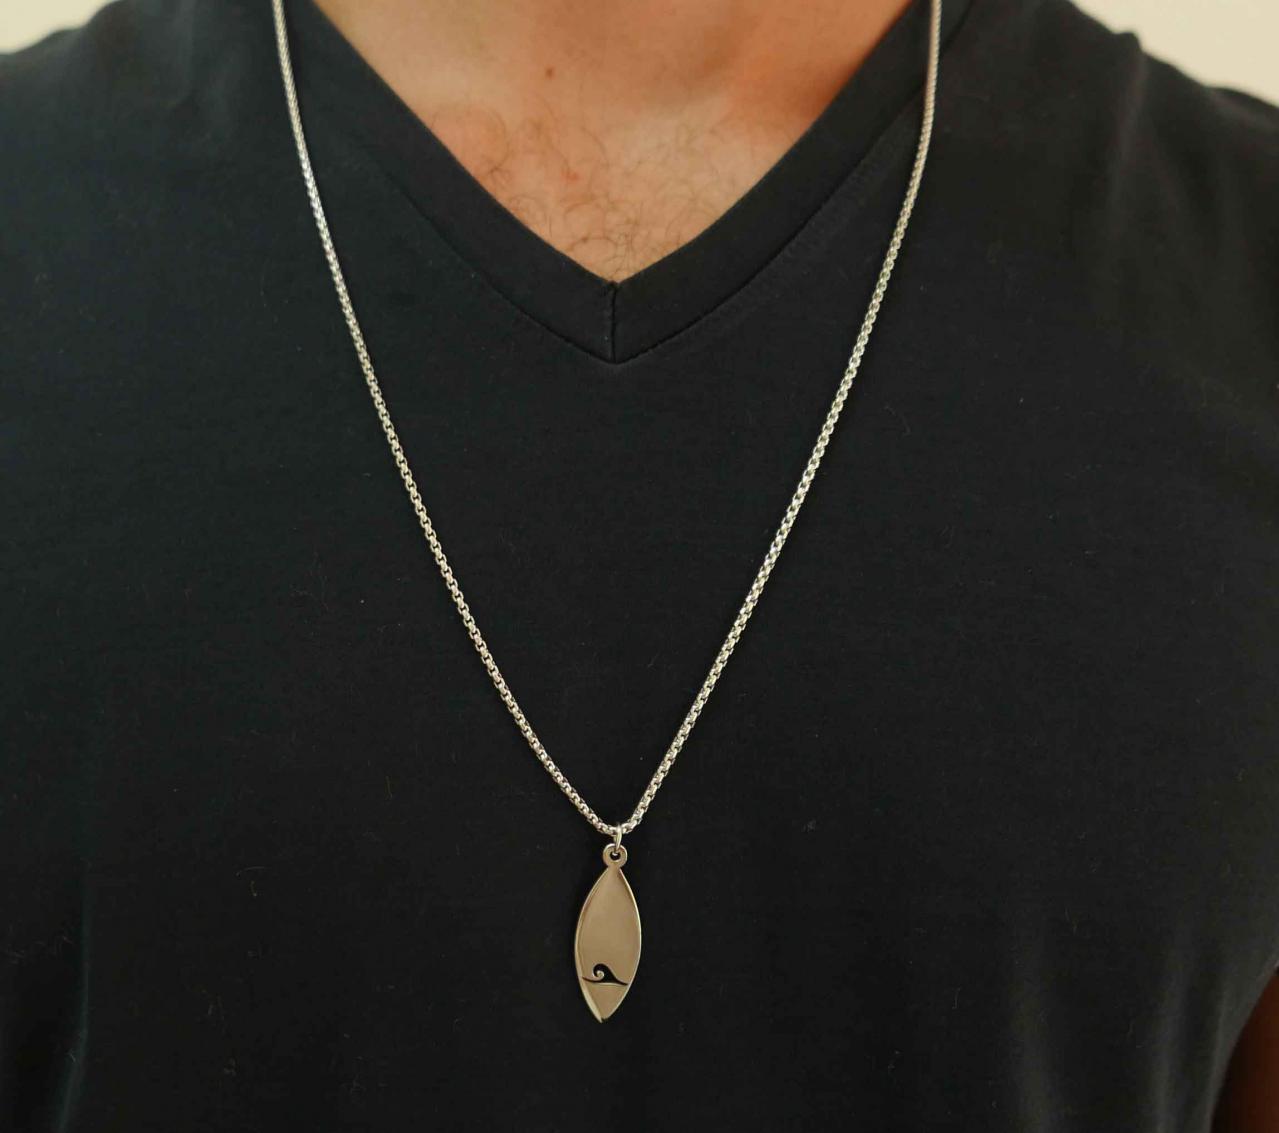 Men's Necklace - Men's Stainless Steel Necklace - Men's Geometric Necklace - Men's Pendant - Men's